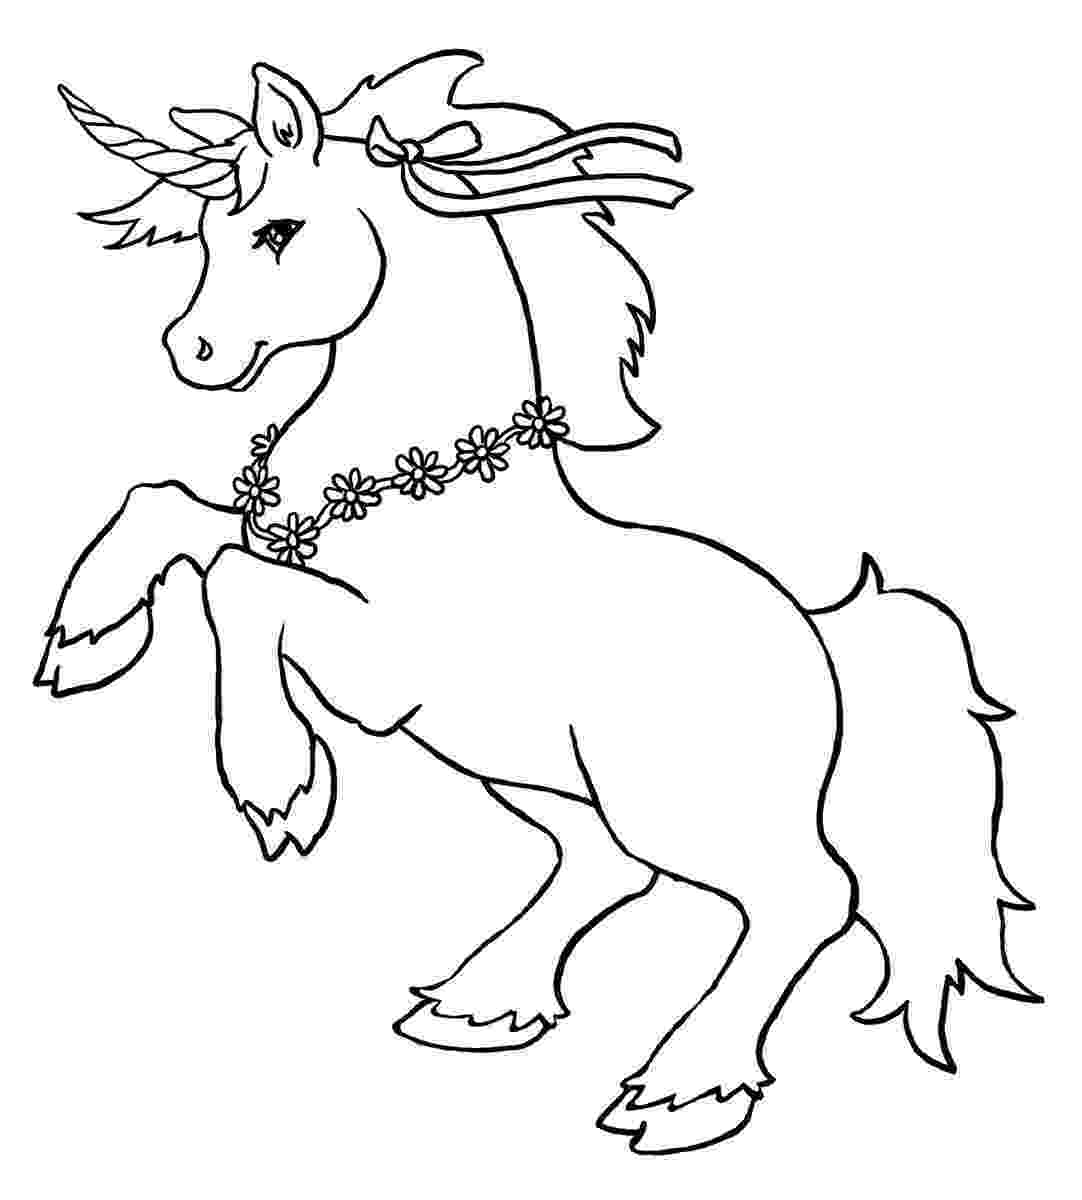 free unicorn pictures to color free printable unicorn coloring pages for kids to unicorn pictures free color 